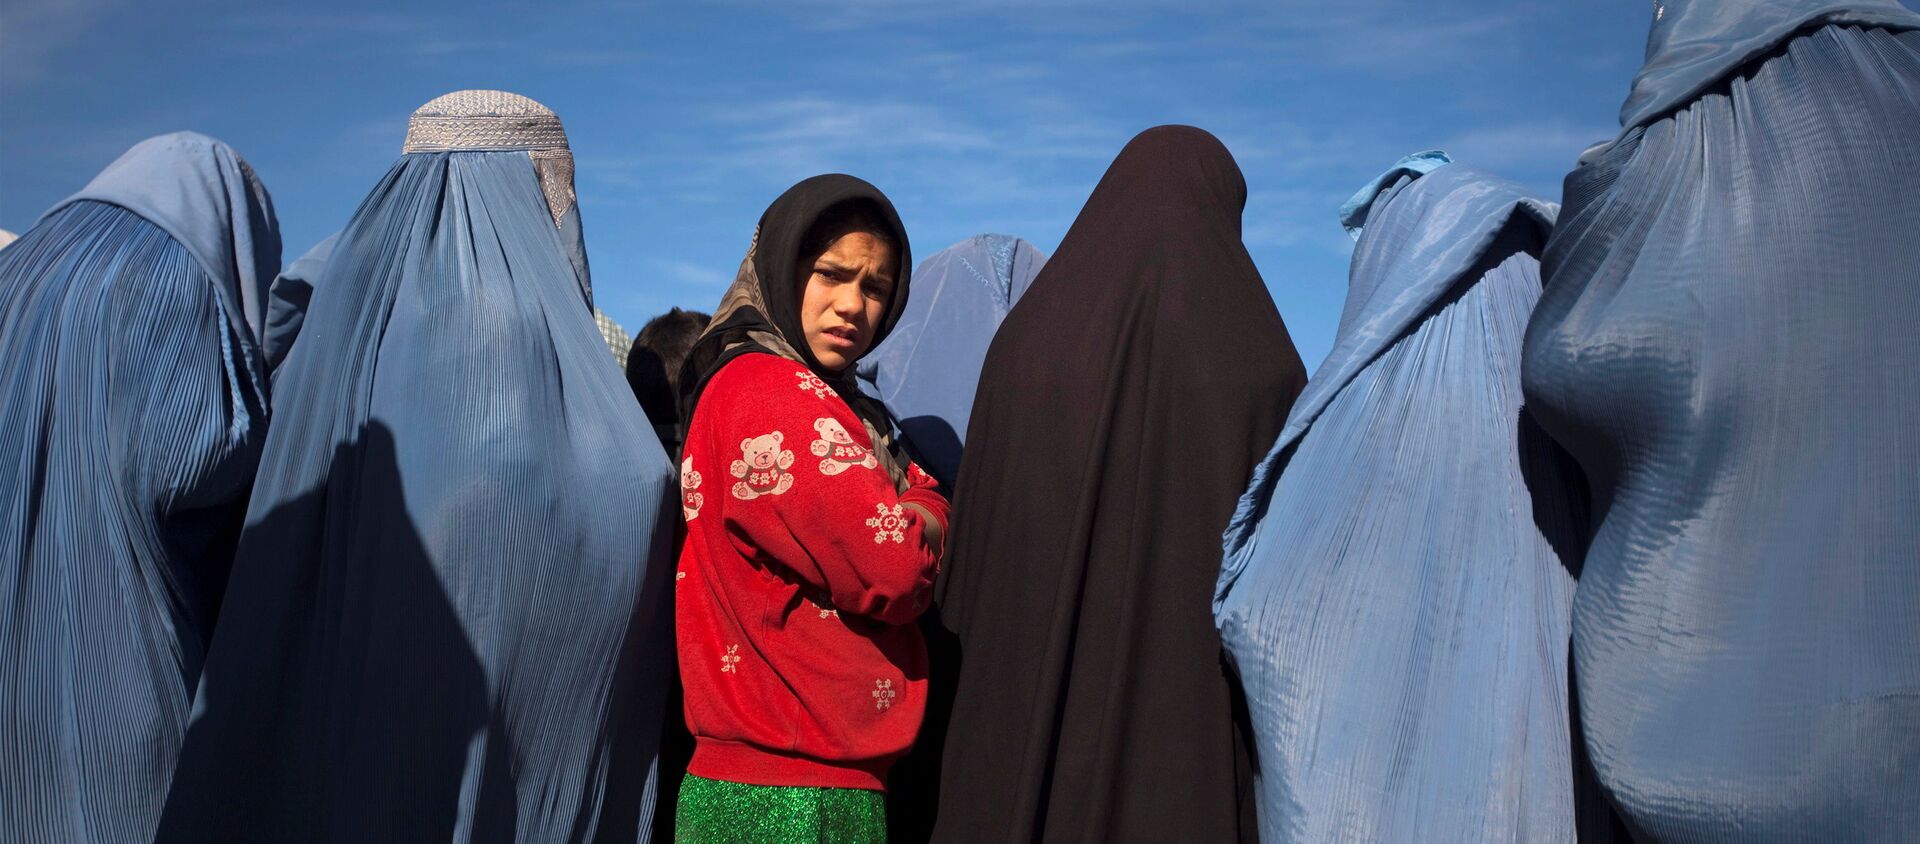 An Afghan girl stands among widows clad in burqas during a cash for work project by humanitarian organisation CARE International in Kabul, Afghanistan January 6, 2010 - Sputnik International, 1920, 03.09.2021